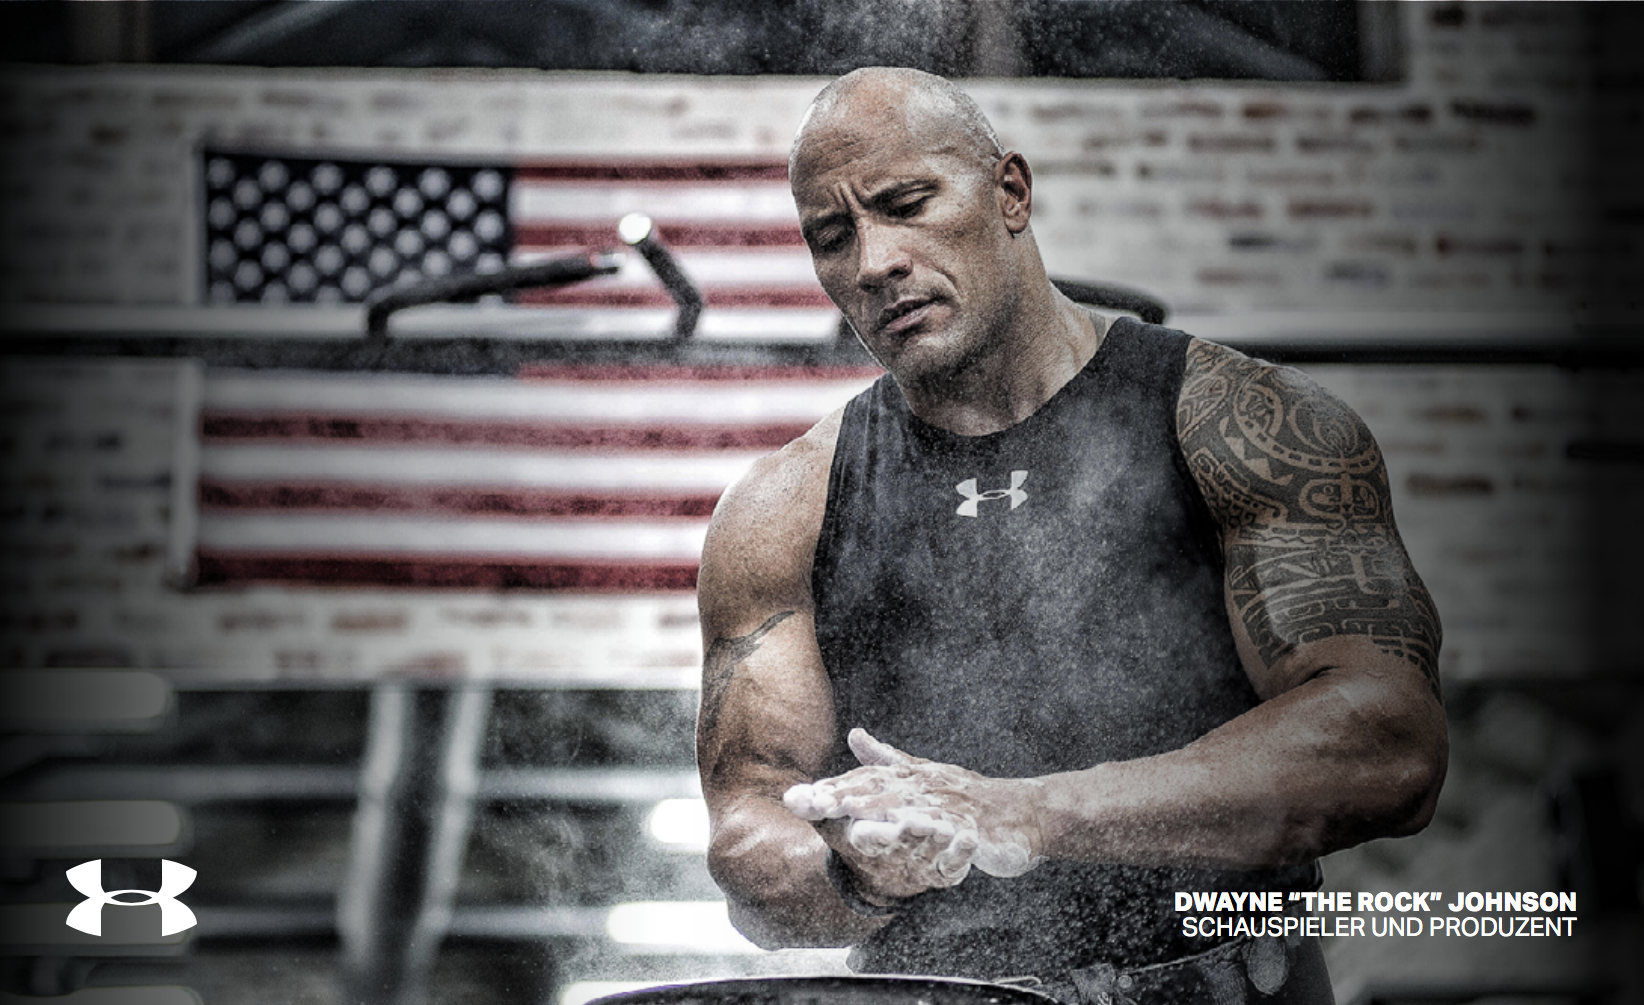 Armour takes on “The Rock"